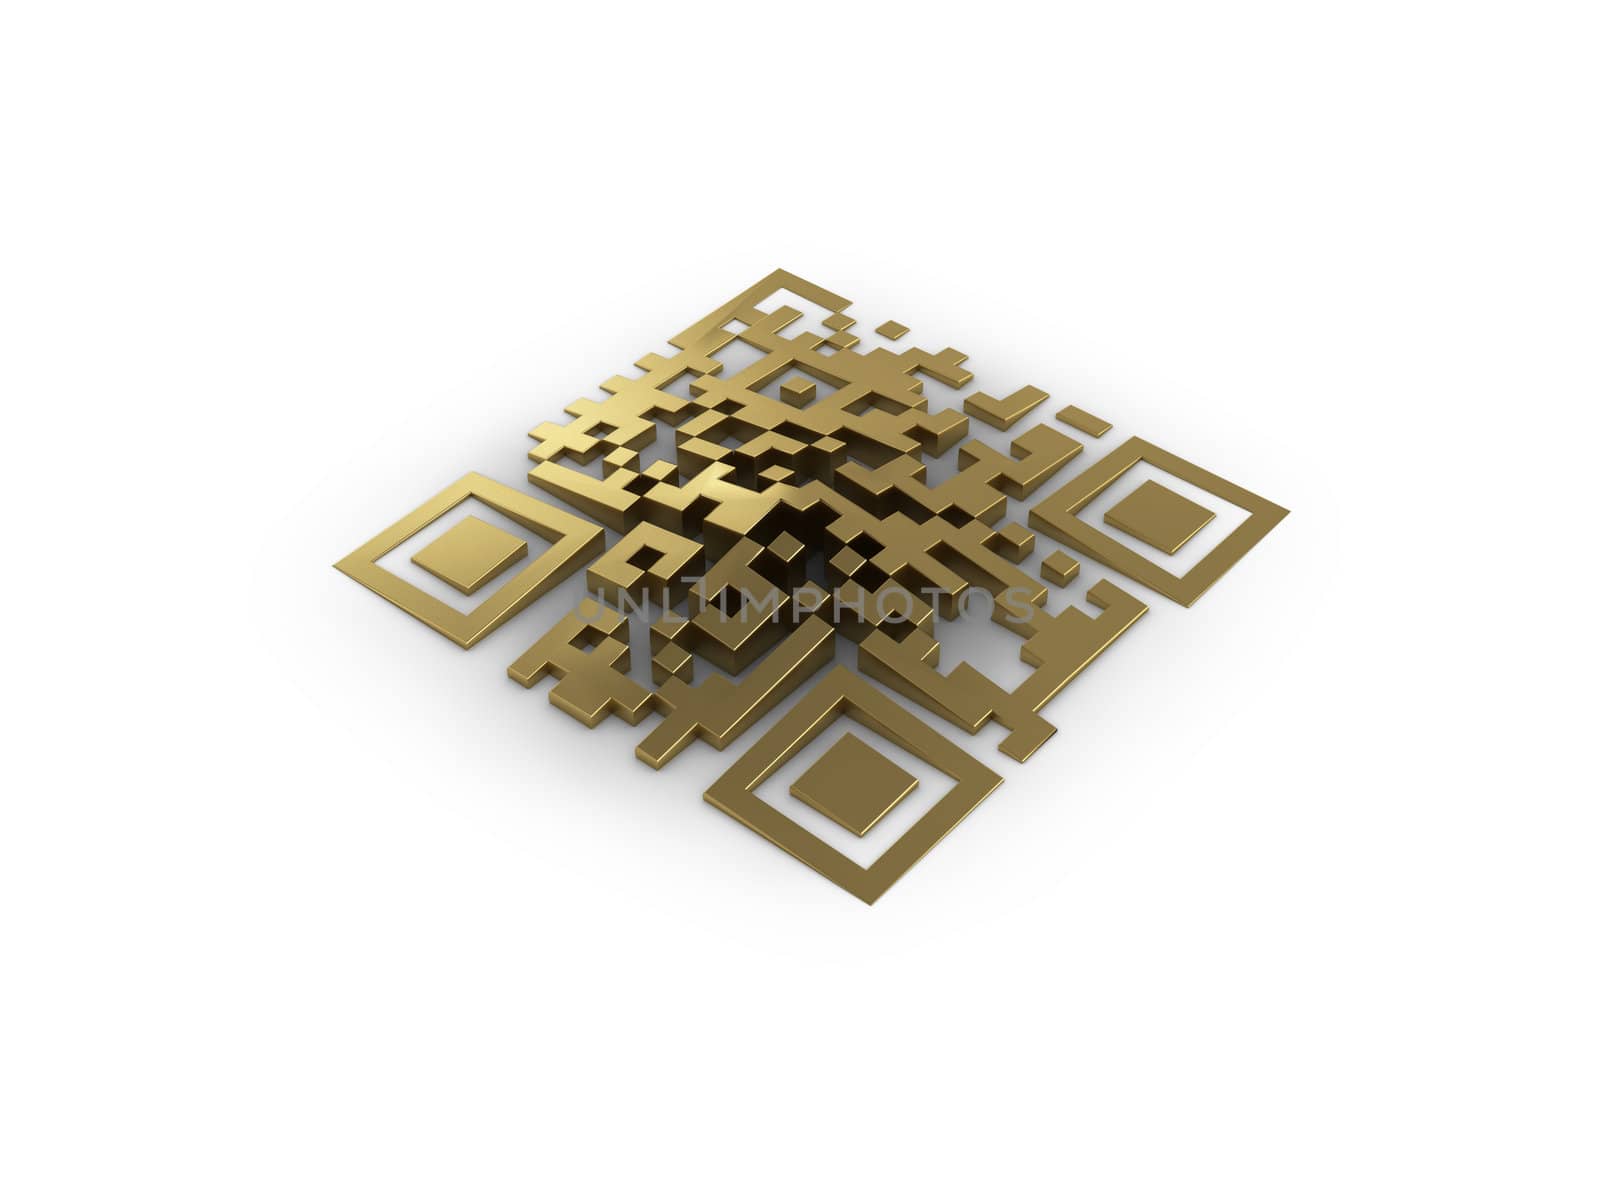 3d rendered concept of a qr-code. Isolated.